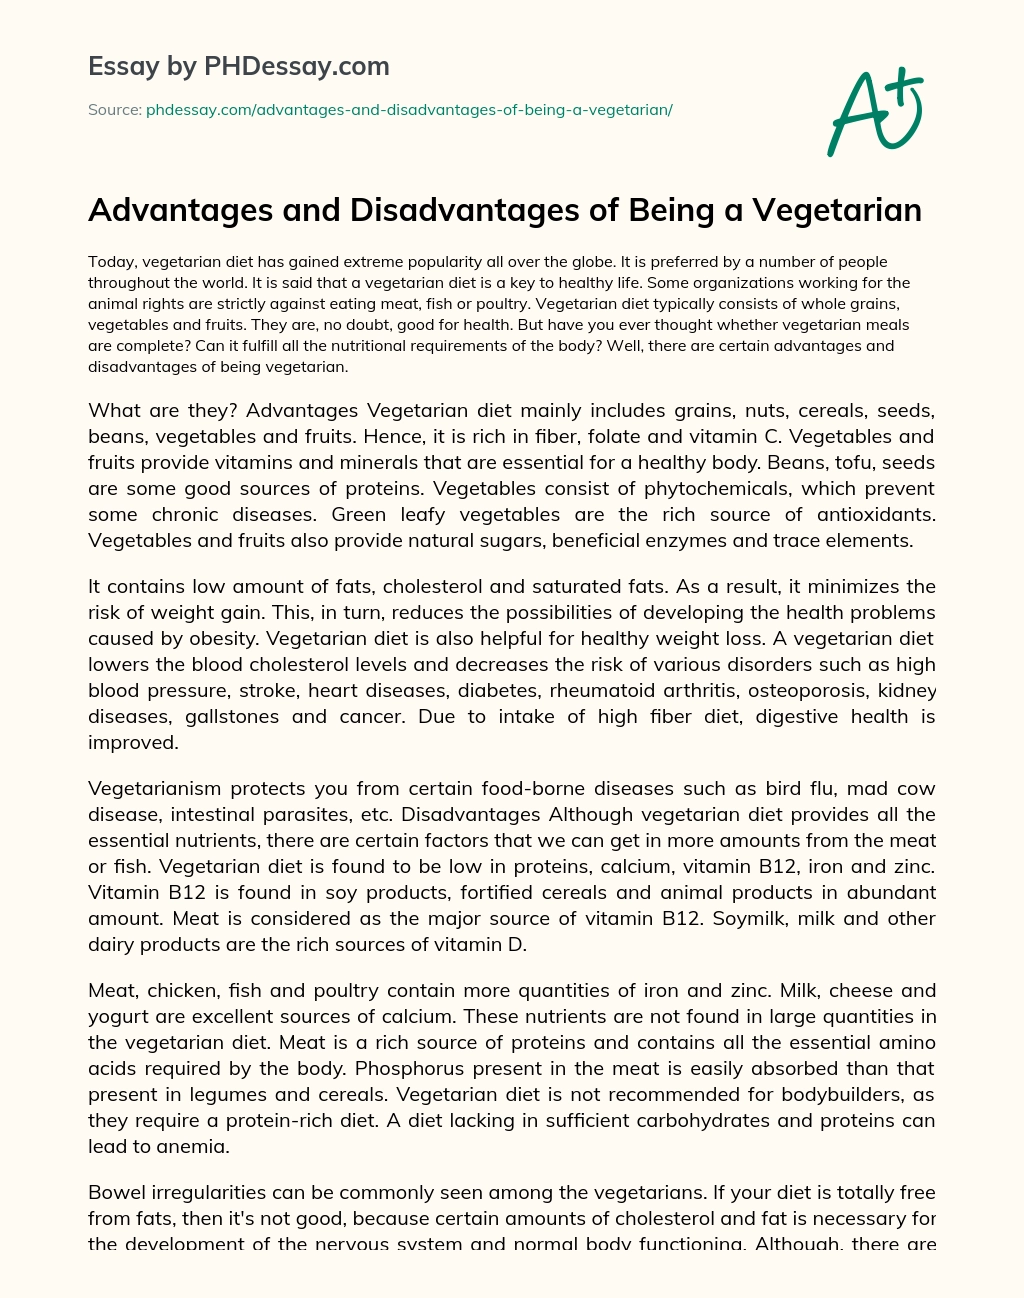 Advantages and Disadvantages of Being a Vegetarian essay